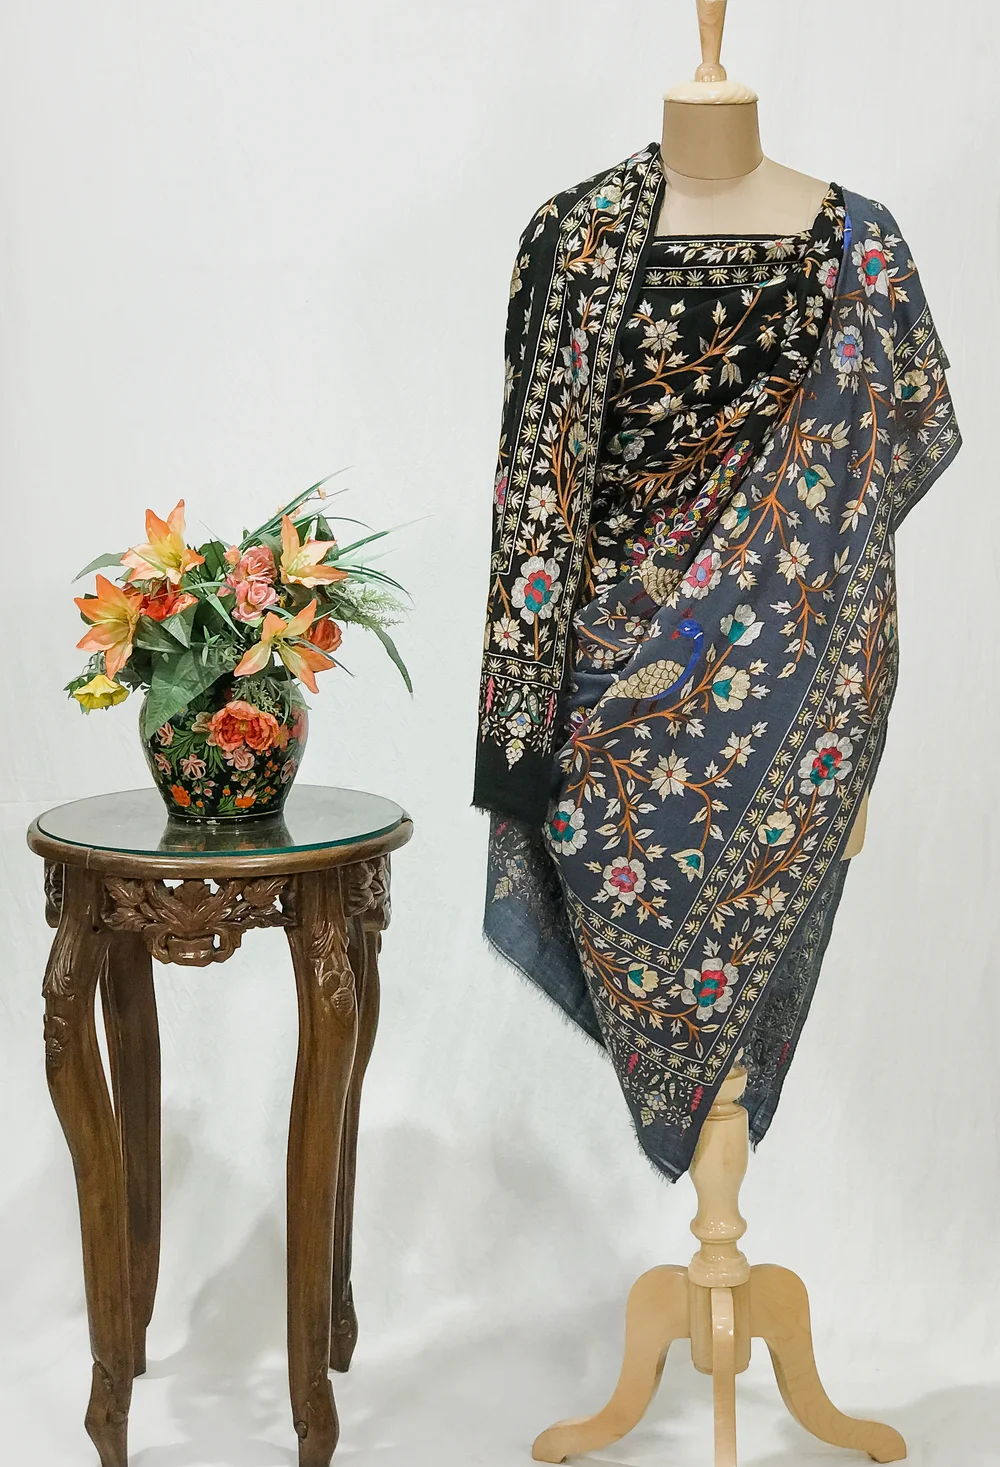 Black and Grey Pure Pashmina Ombrey Shawl With Tilla Jaal Hand Embroidery